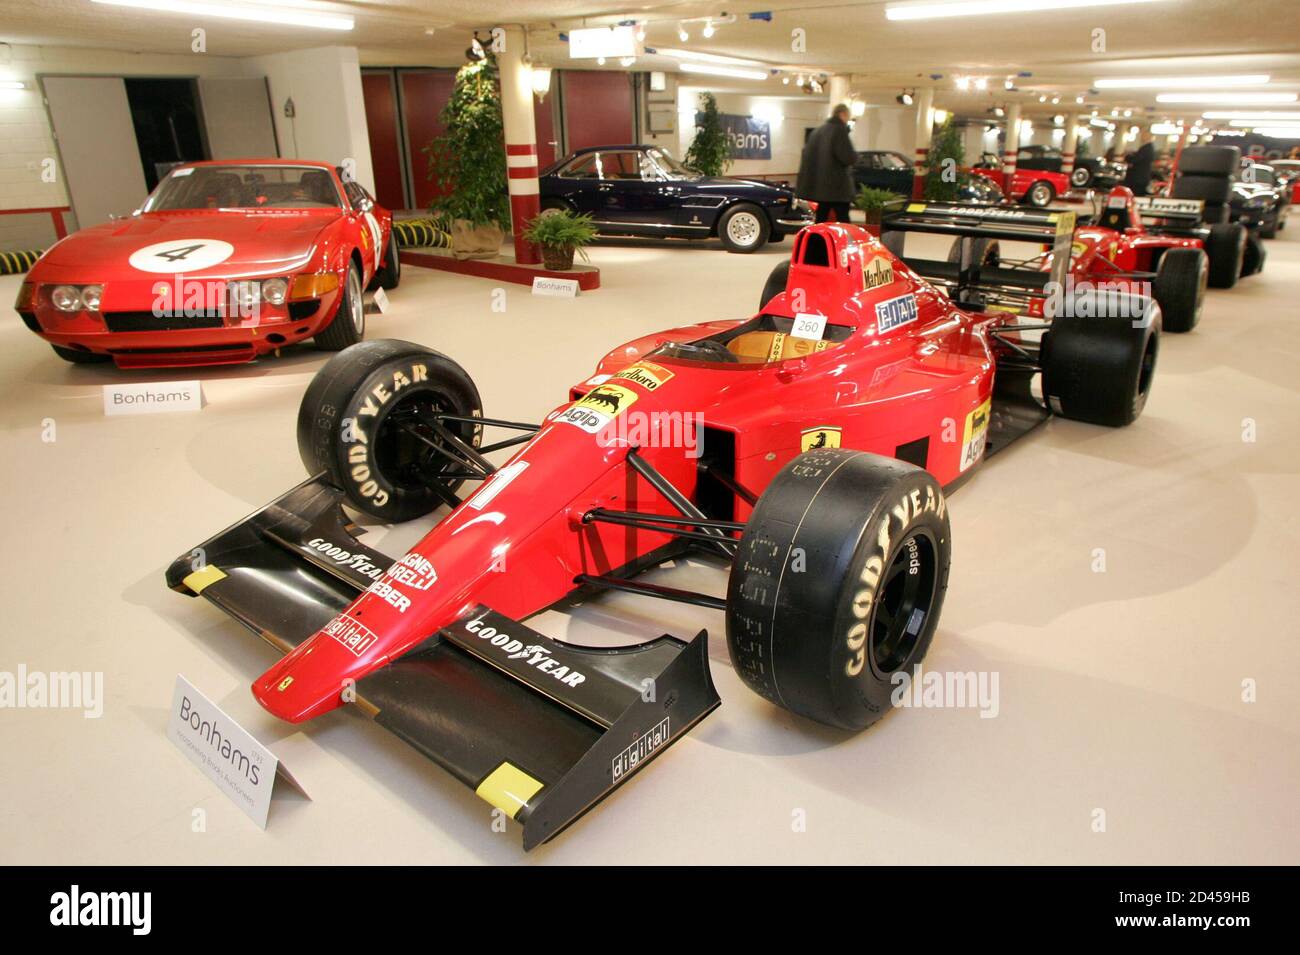 A 1990 Ferrari F1/90 Tipo 641/2 that was driven by French Formula 1 driver  Alain Prost to be auctioned in Gstaad. This 1990 Ferrari F1/90 Tipo 641/2  that was driven by French